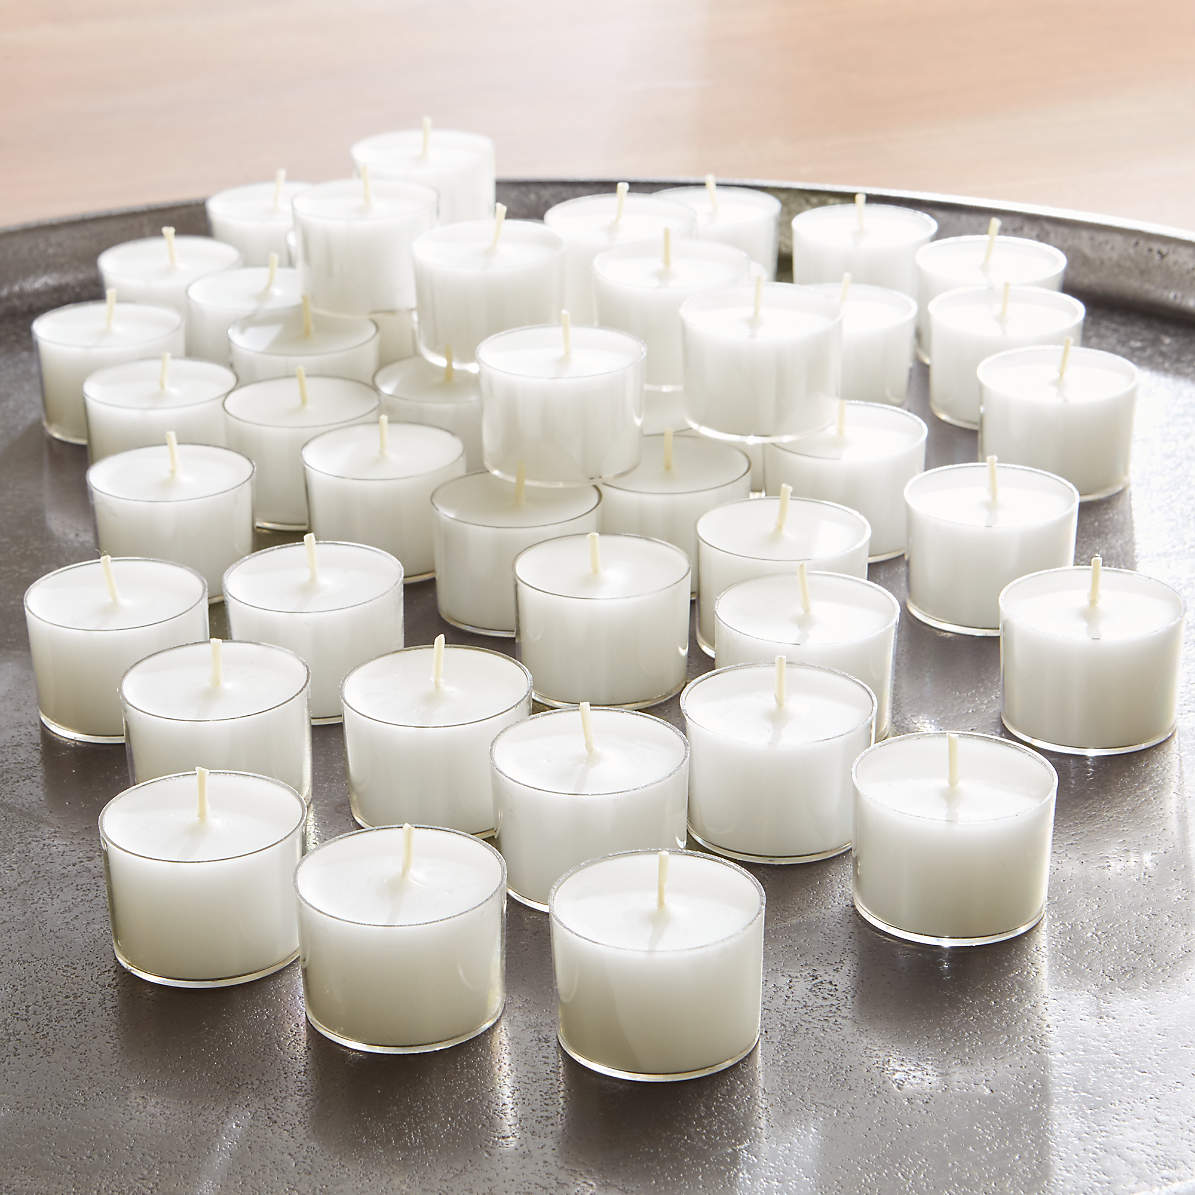 PRICES CITRONELLA TEALIGHTS FRAGRANCED CANDLES UPTO 4 HOURS BURN TIME FOR GARDEN 